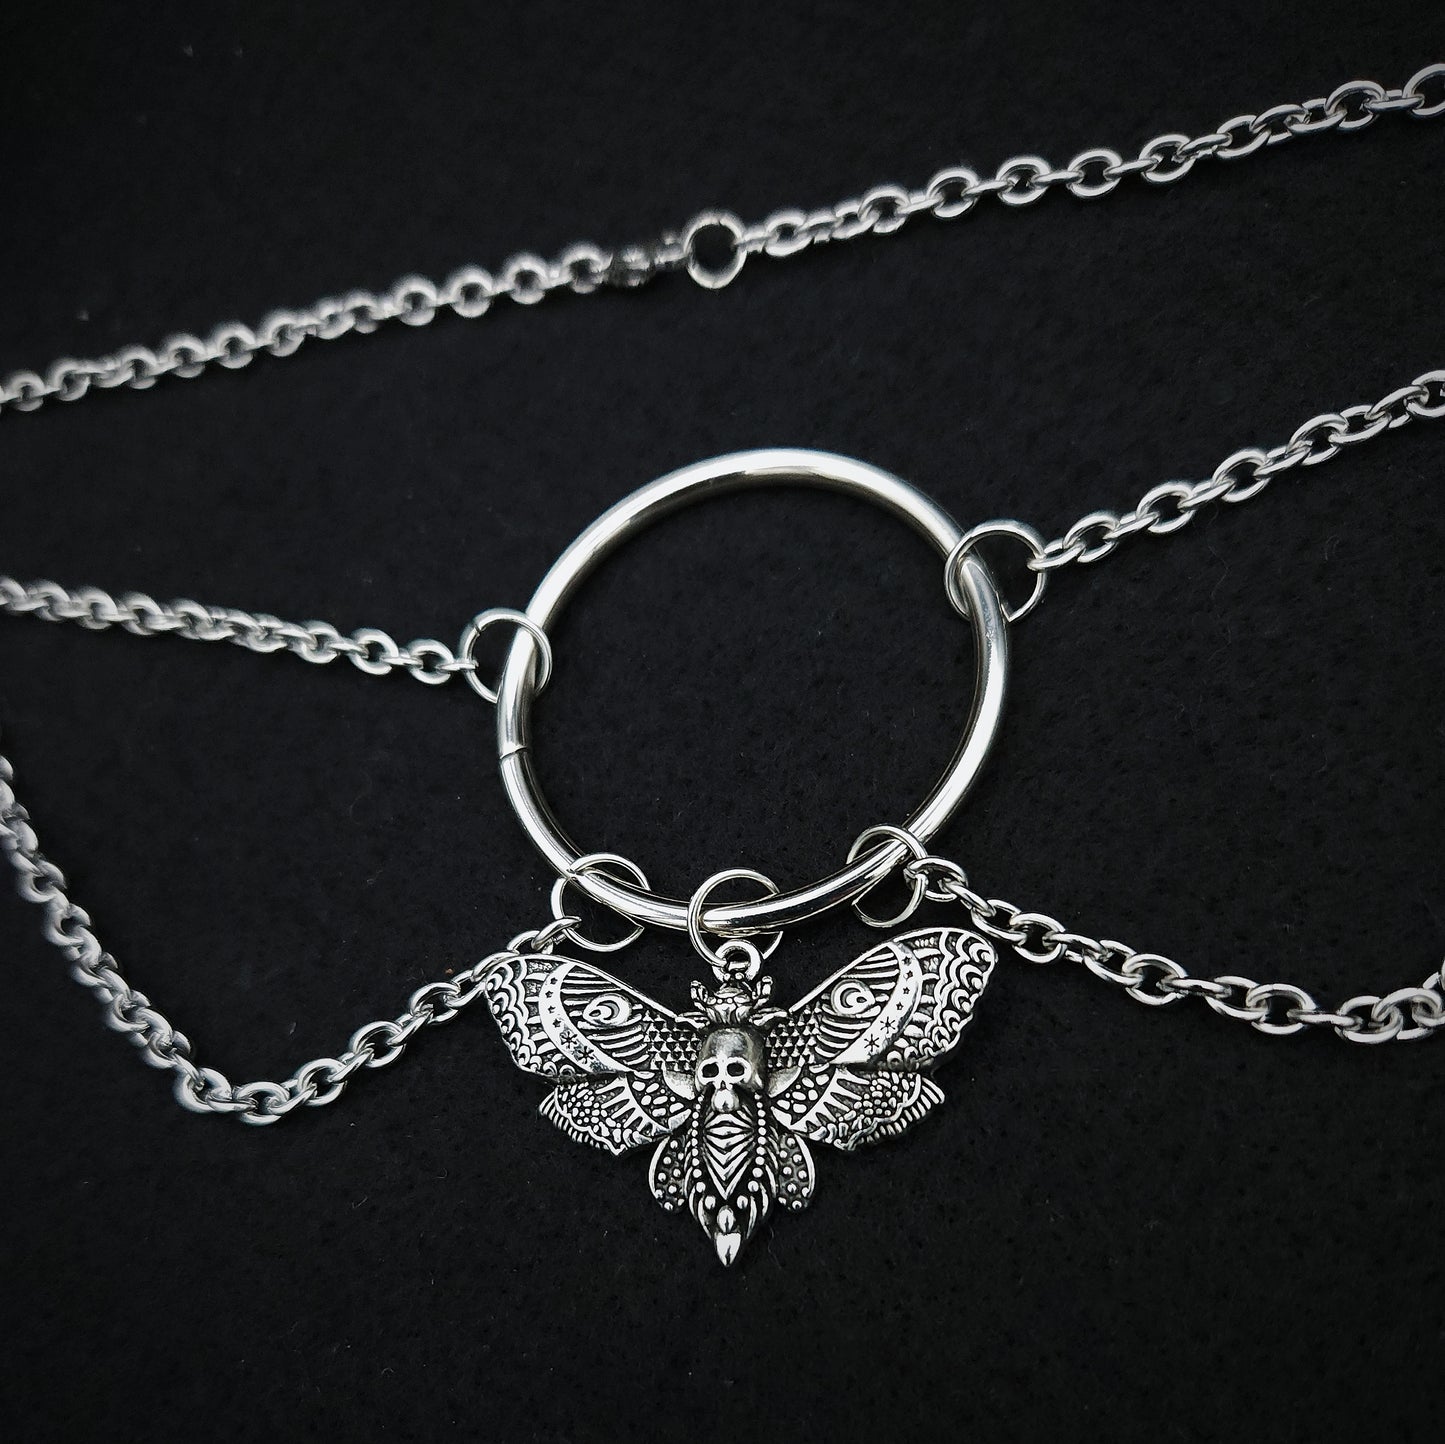 Moth Draped Chain Necklace